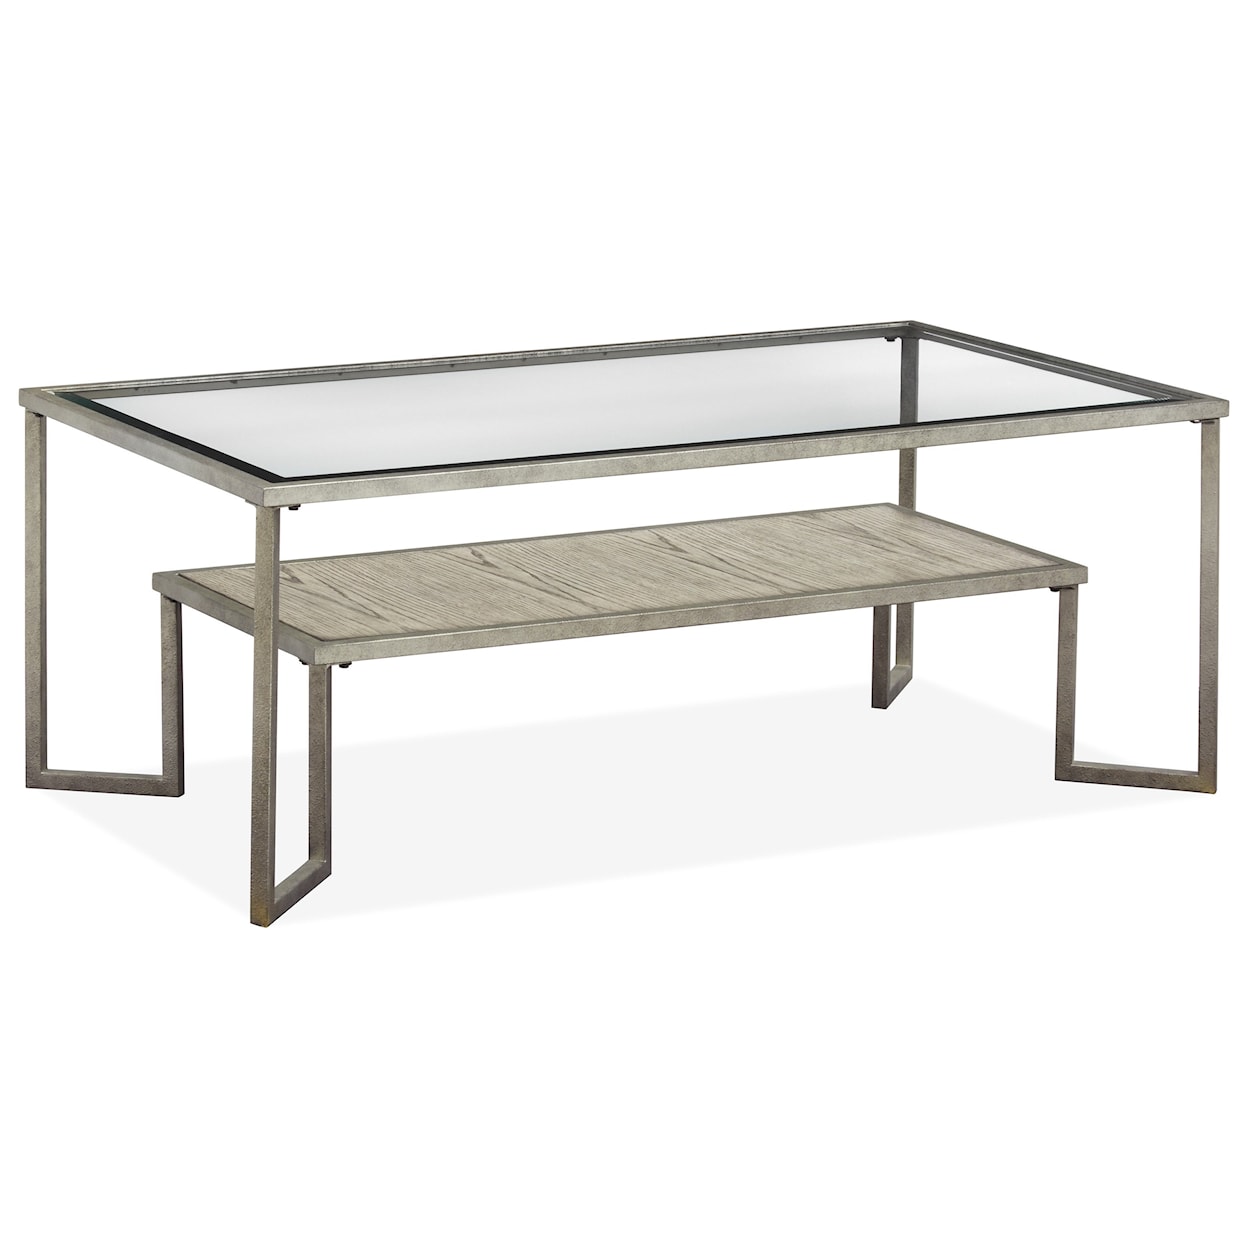 Belfort Select Bendishaw Occasional Tables Cocktail Table